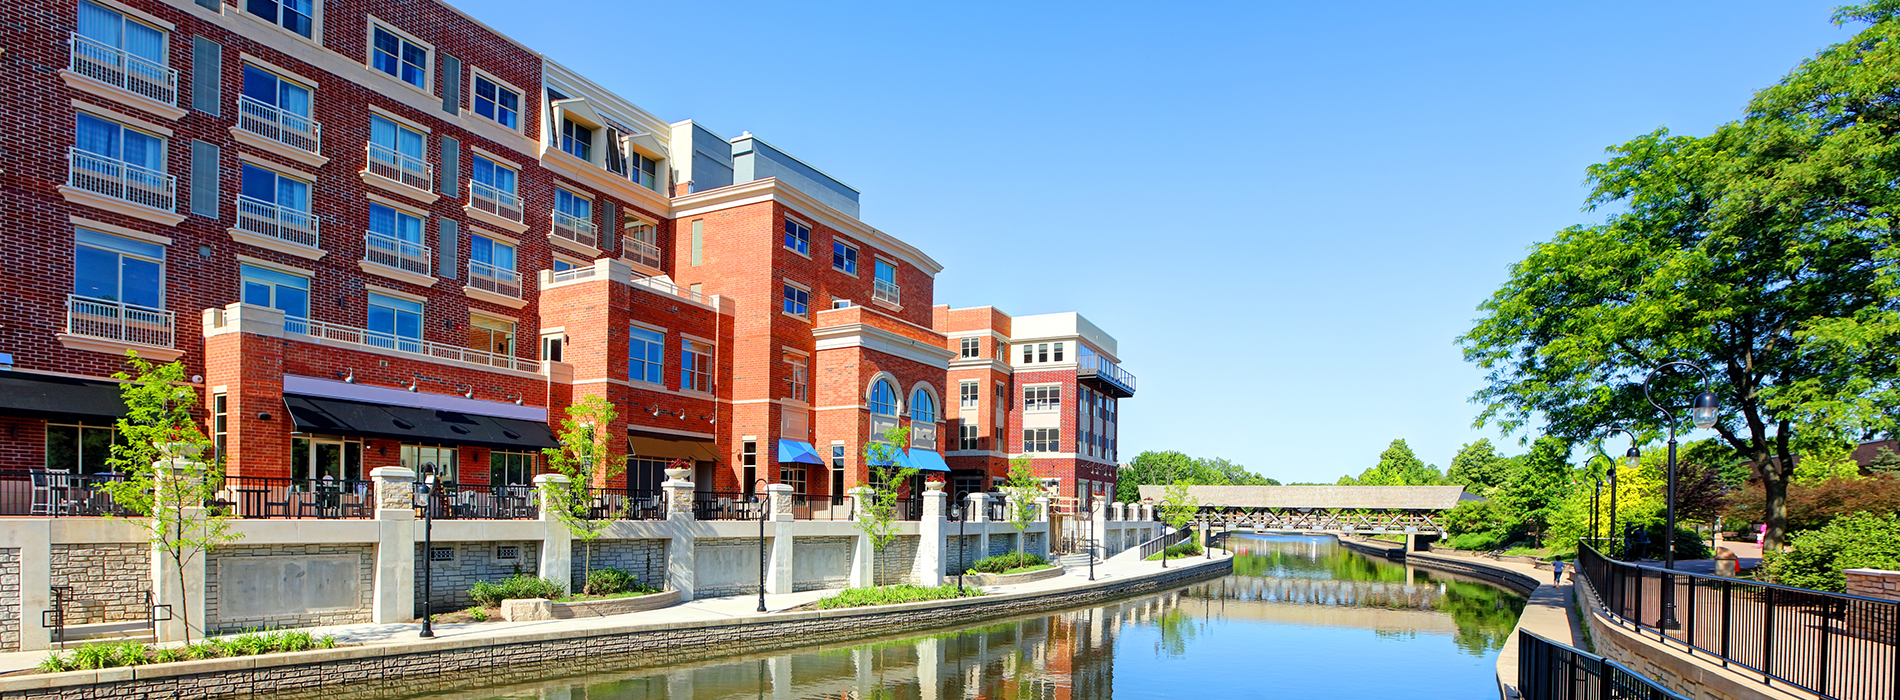 Downtown and waterfront in Naperville IL